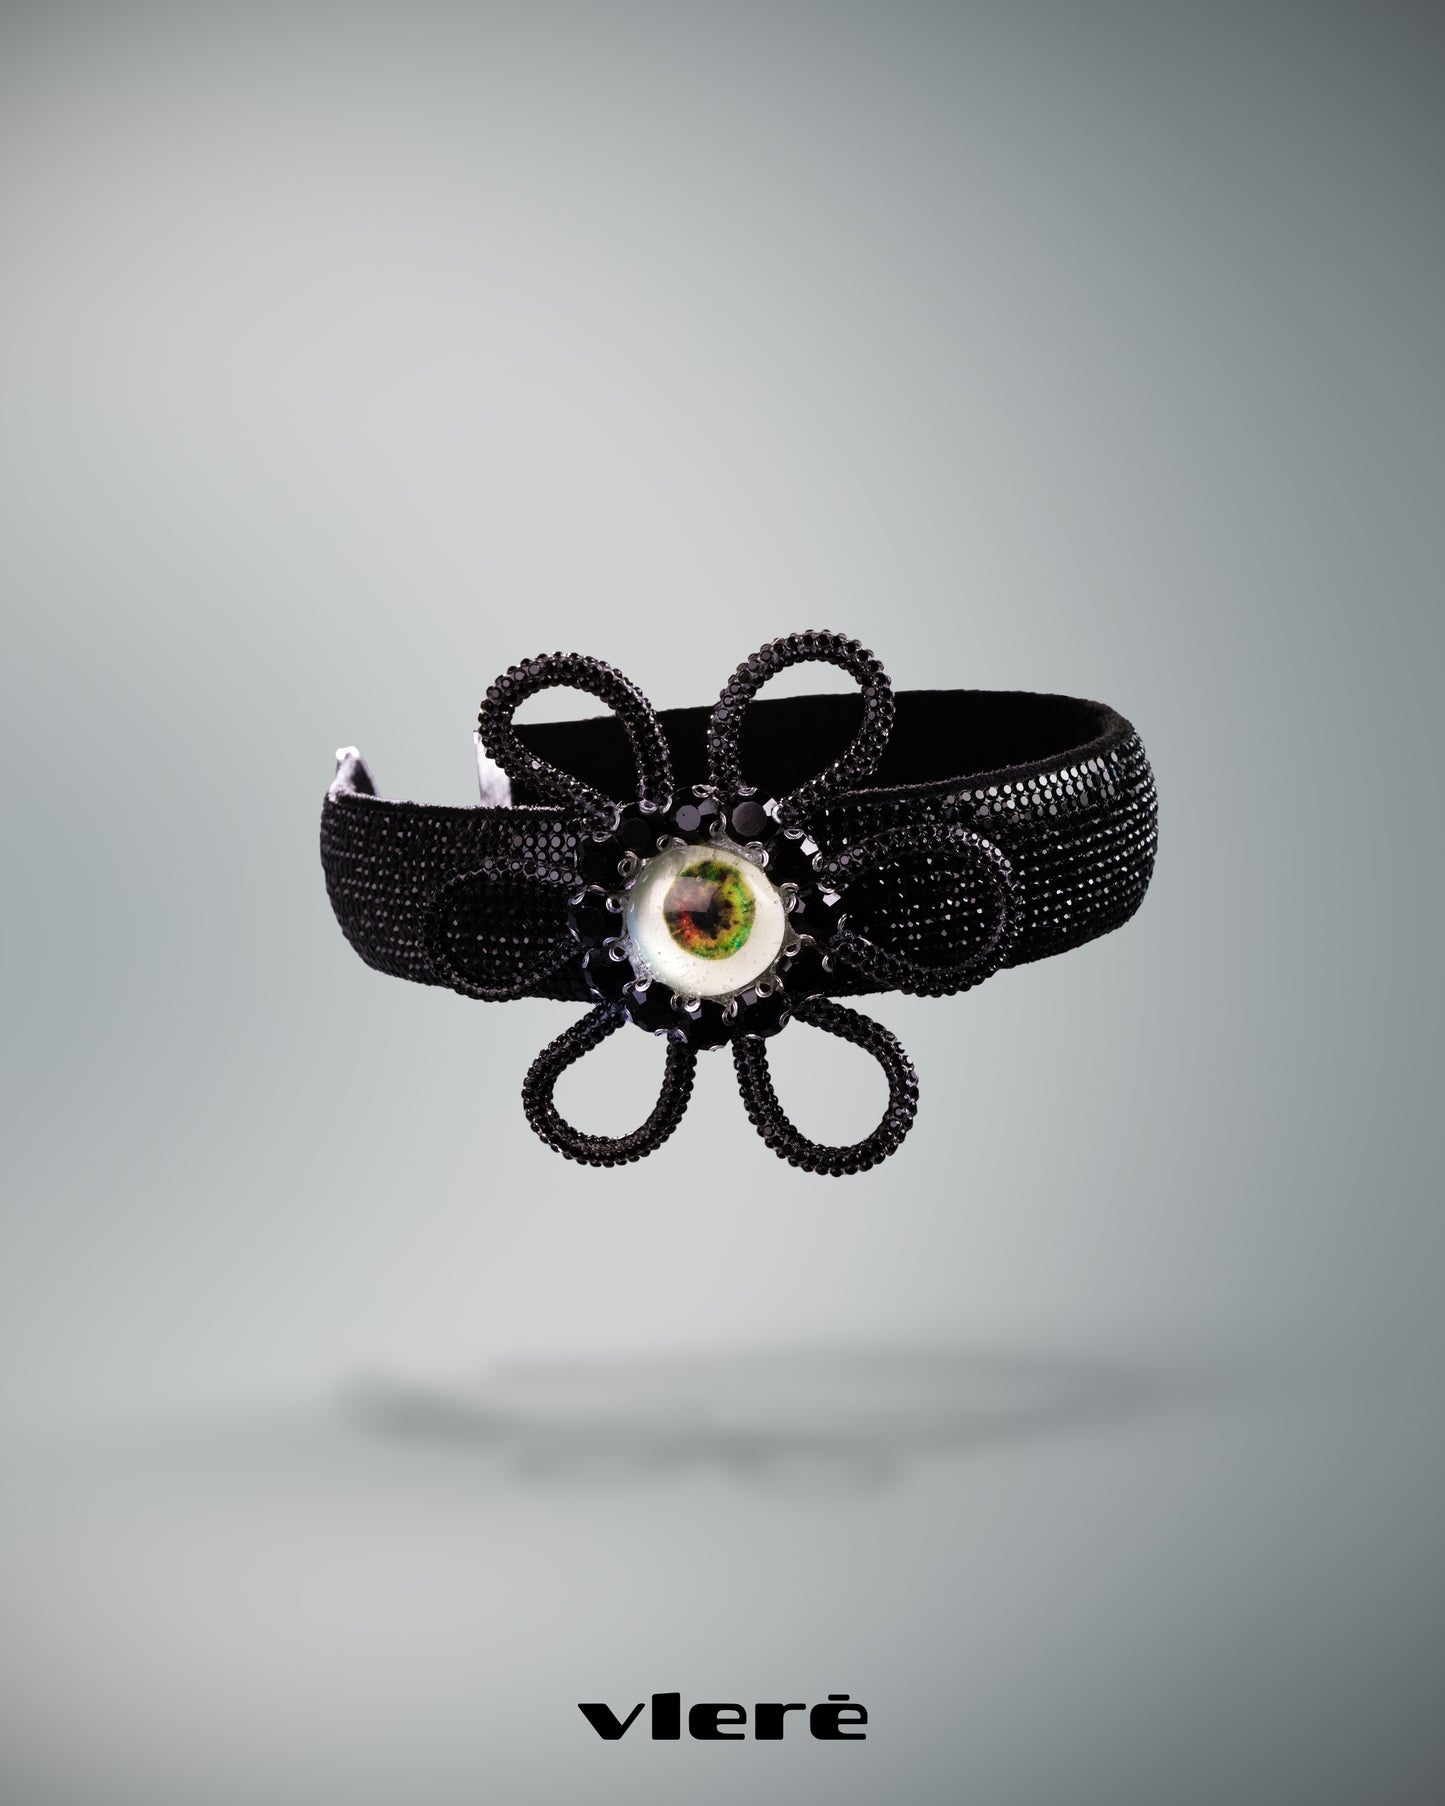 The Black Flower Necklace